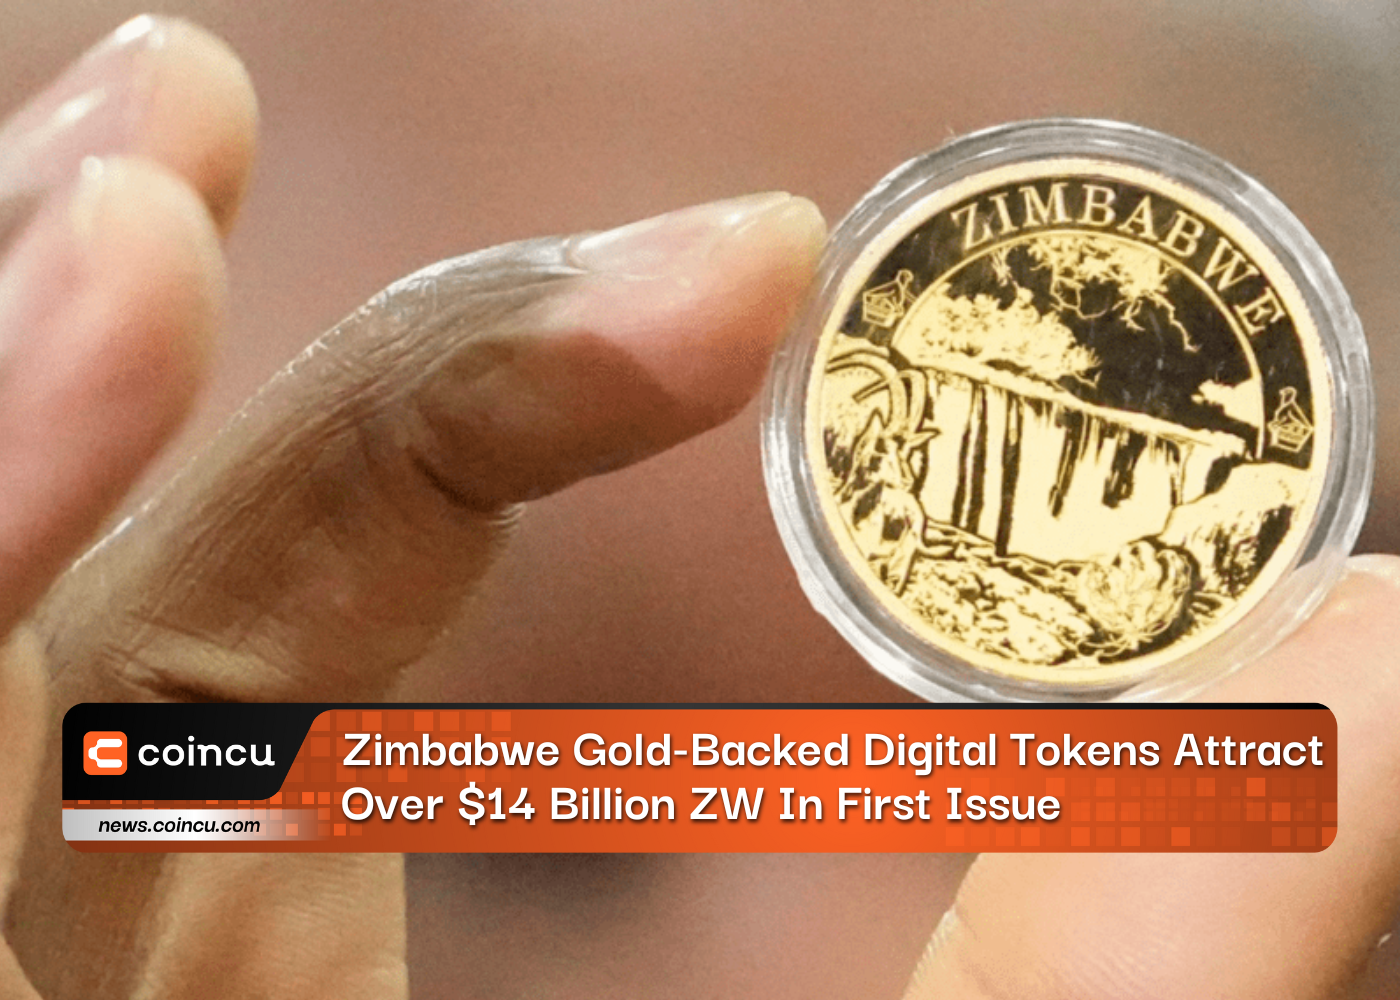 Zimbabwe Gold-Backed Digital Tokens Attract Over $14 Billion ZW In First Issue